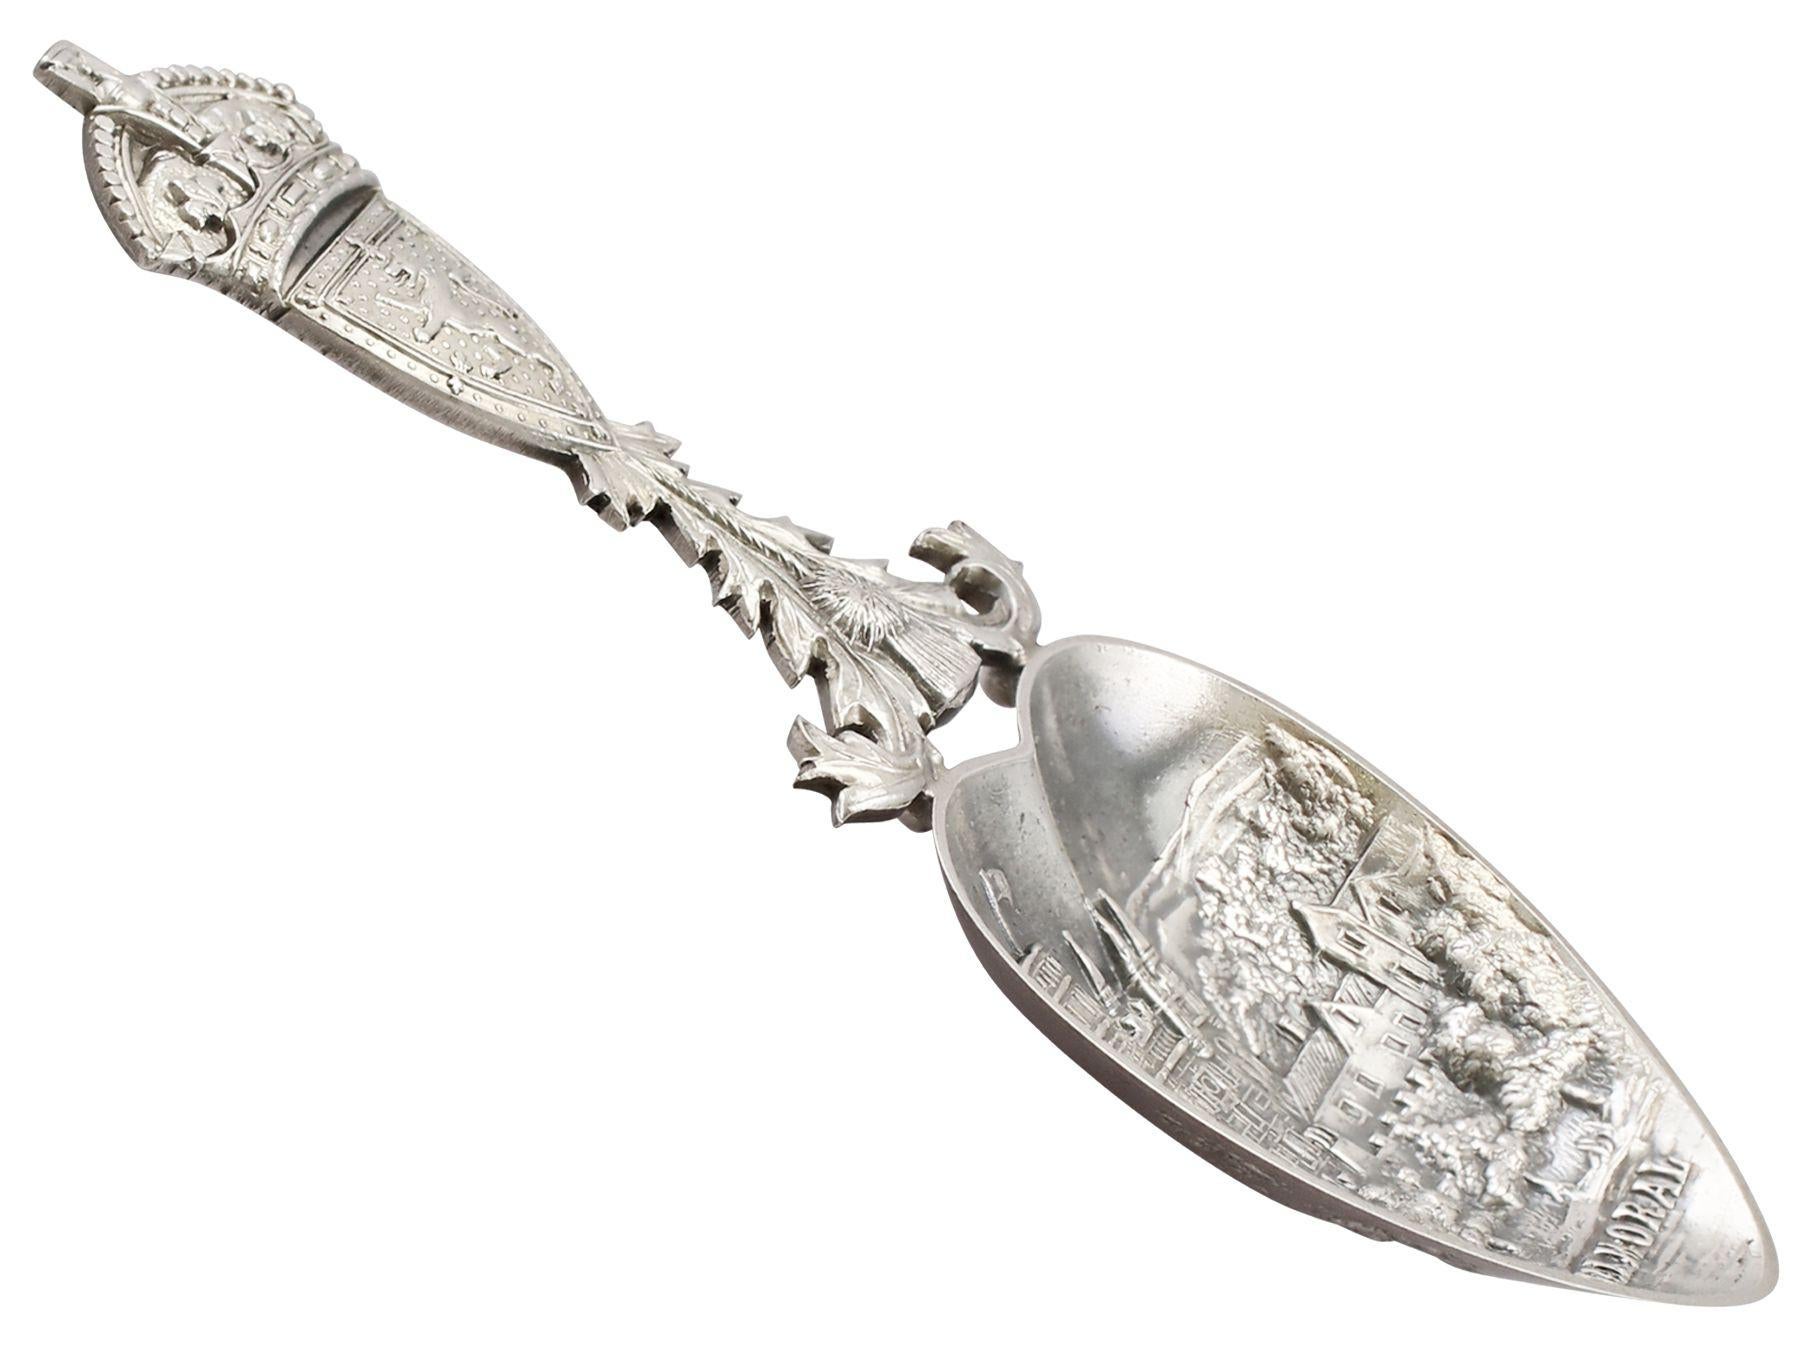 An exceptional, fine and impressive, unusual antique George V Scottish sterling silver caddy spoon; an addition to our teaware collection.

This exceptional antique George V Scottish sterling silver caddy spoon has a heart shaped bowl.

The